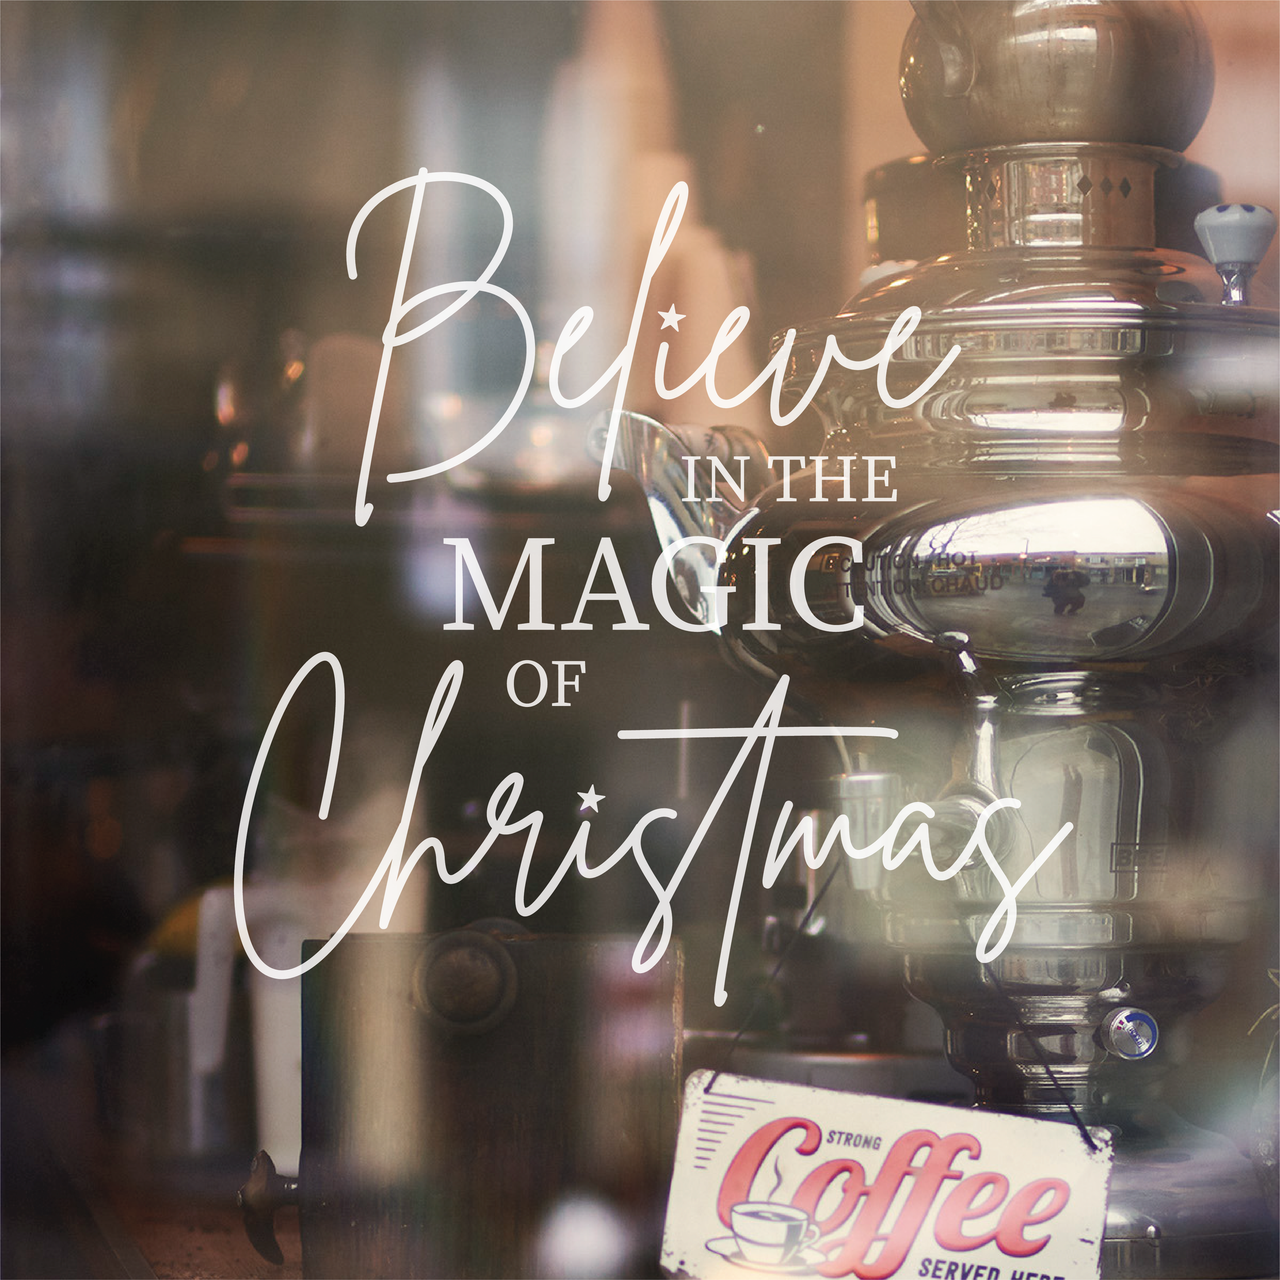 Believe in the Magic of Christmas - Festive Wall Decal